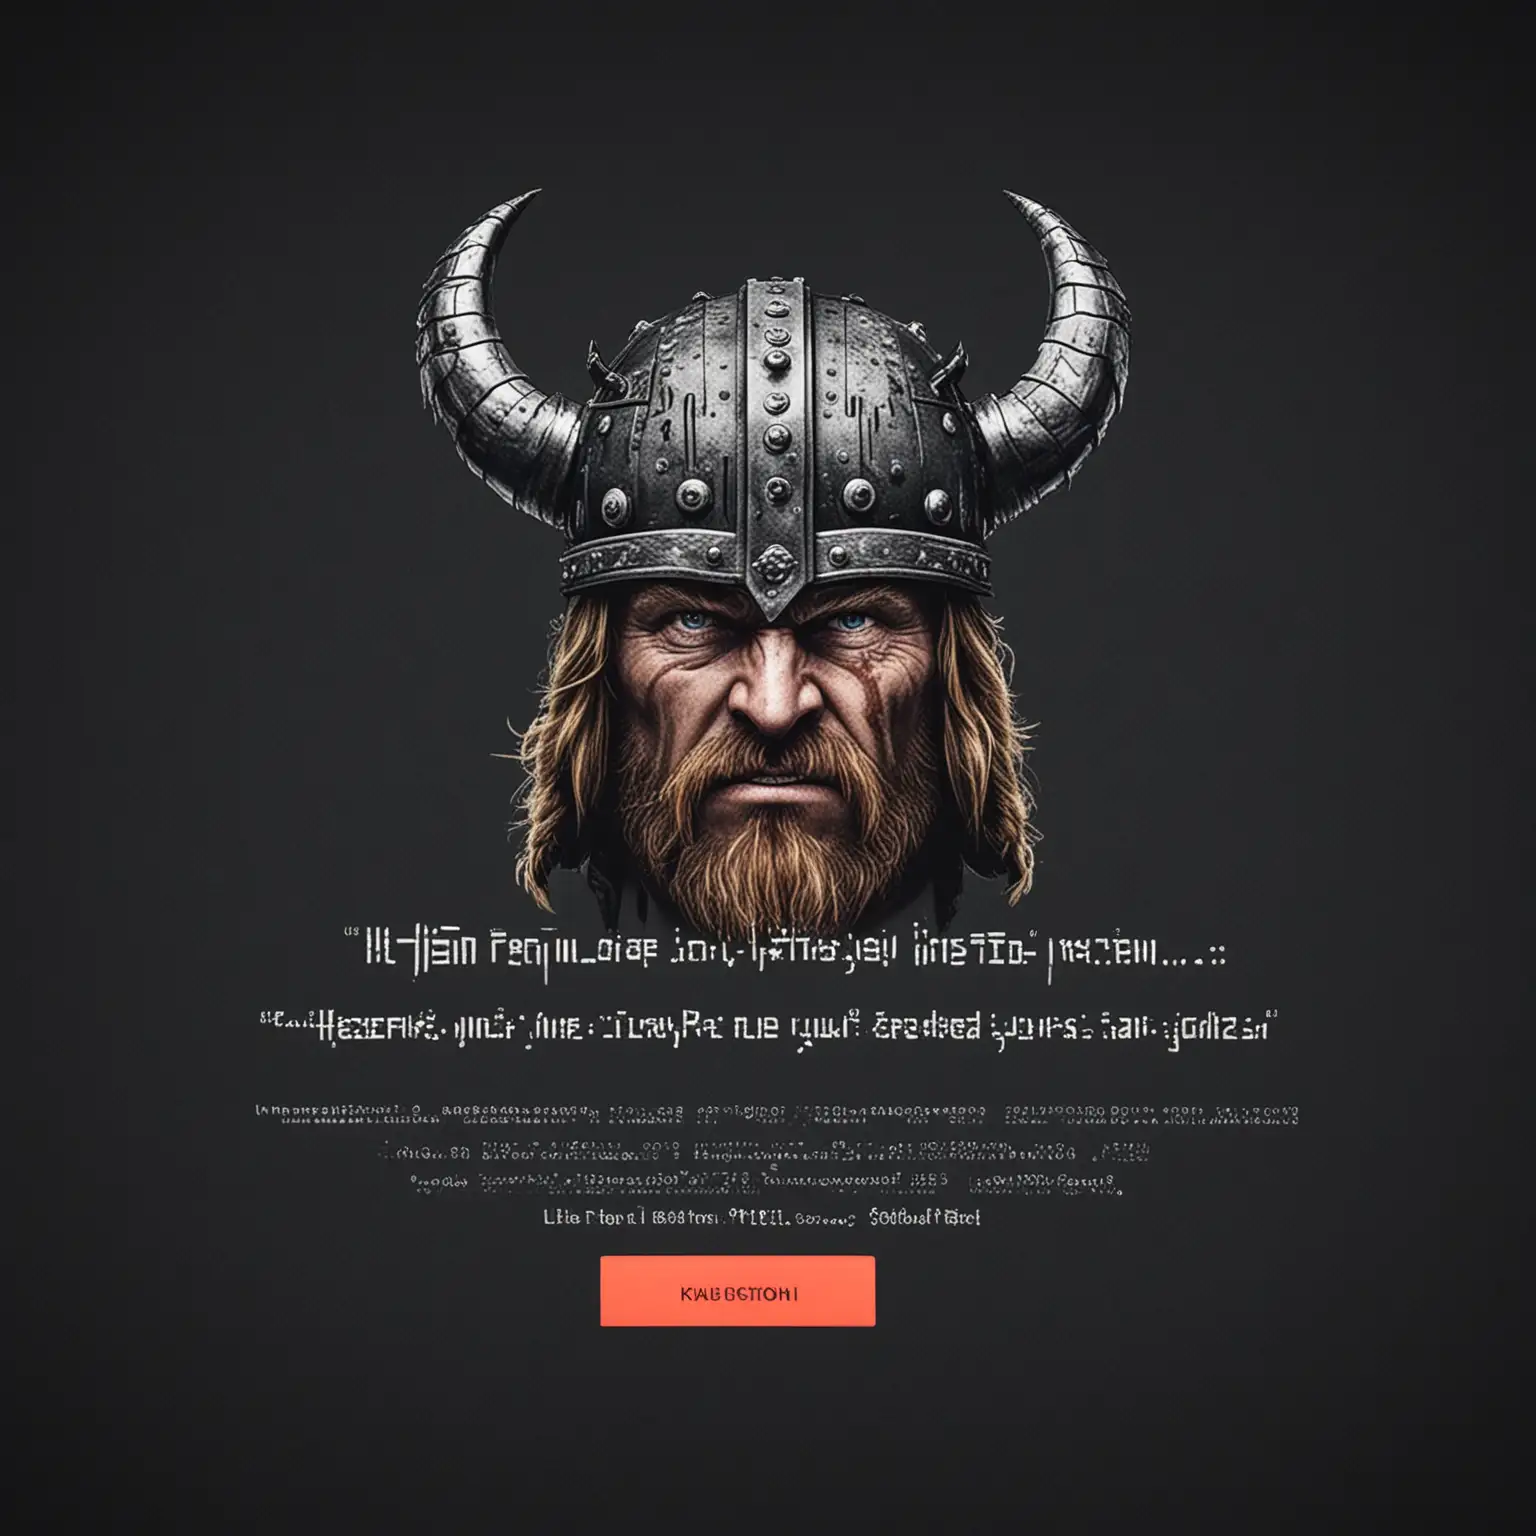 Generate a ransomware lock screen for an imaginary hacker group called viking coders